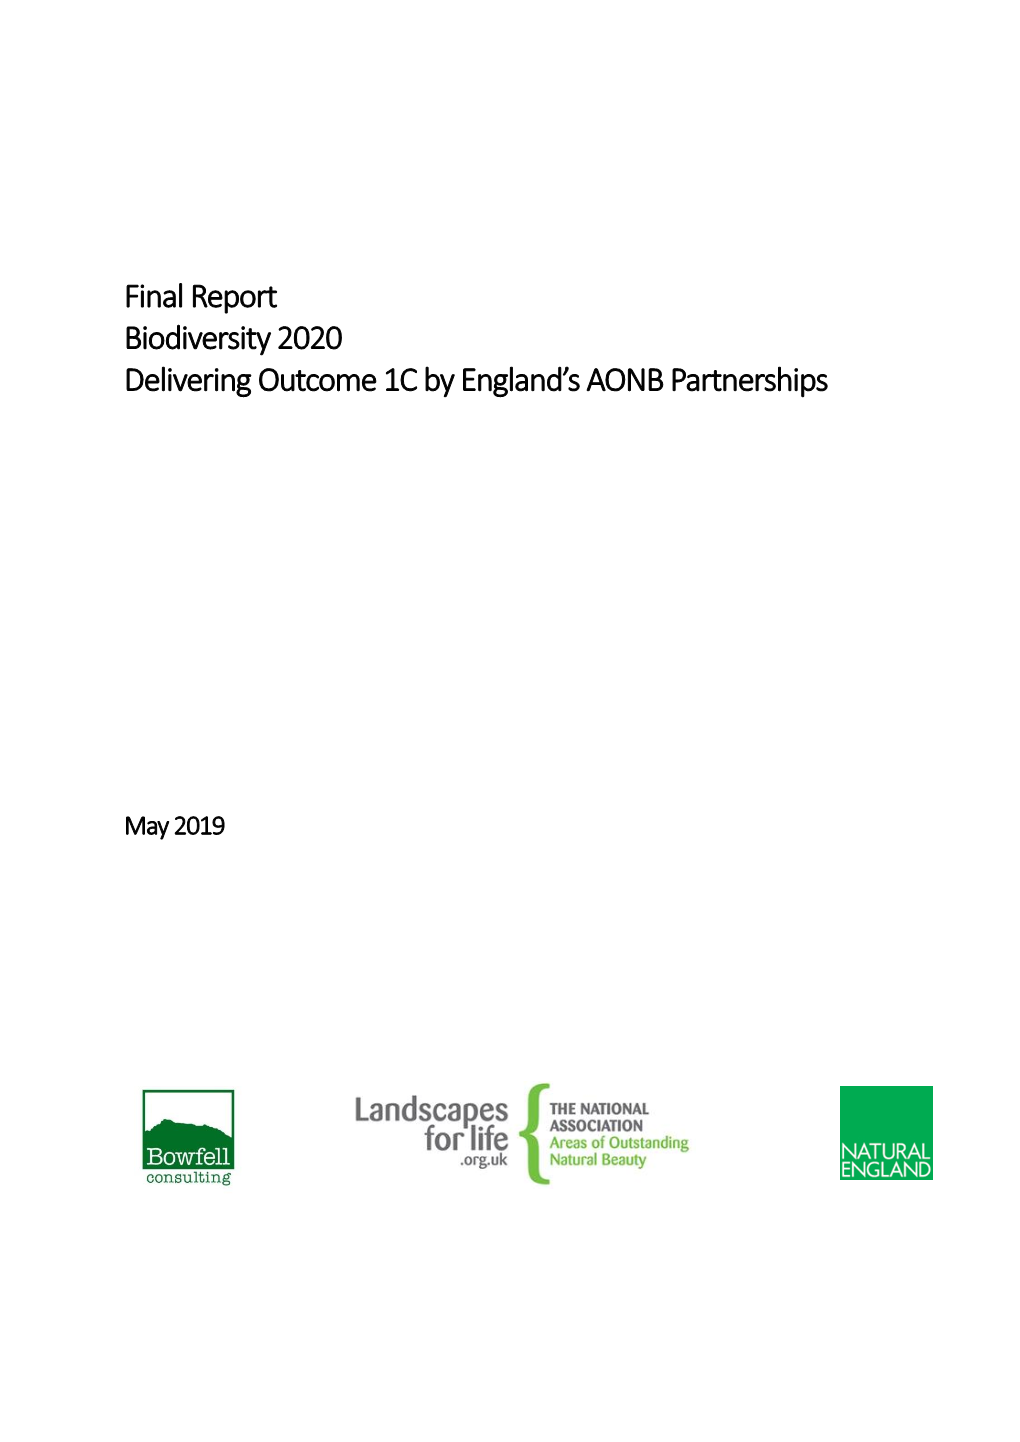 Final Report Biodiversity 2020 Delivering Outcome 1C by England’S AONB Partnerships